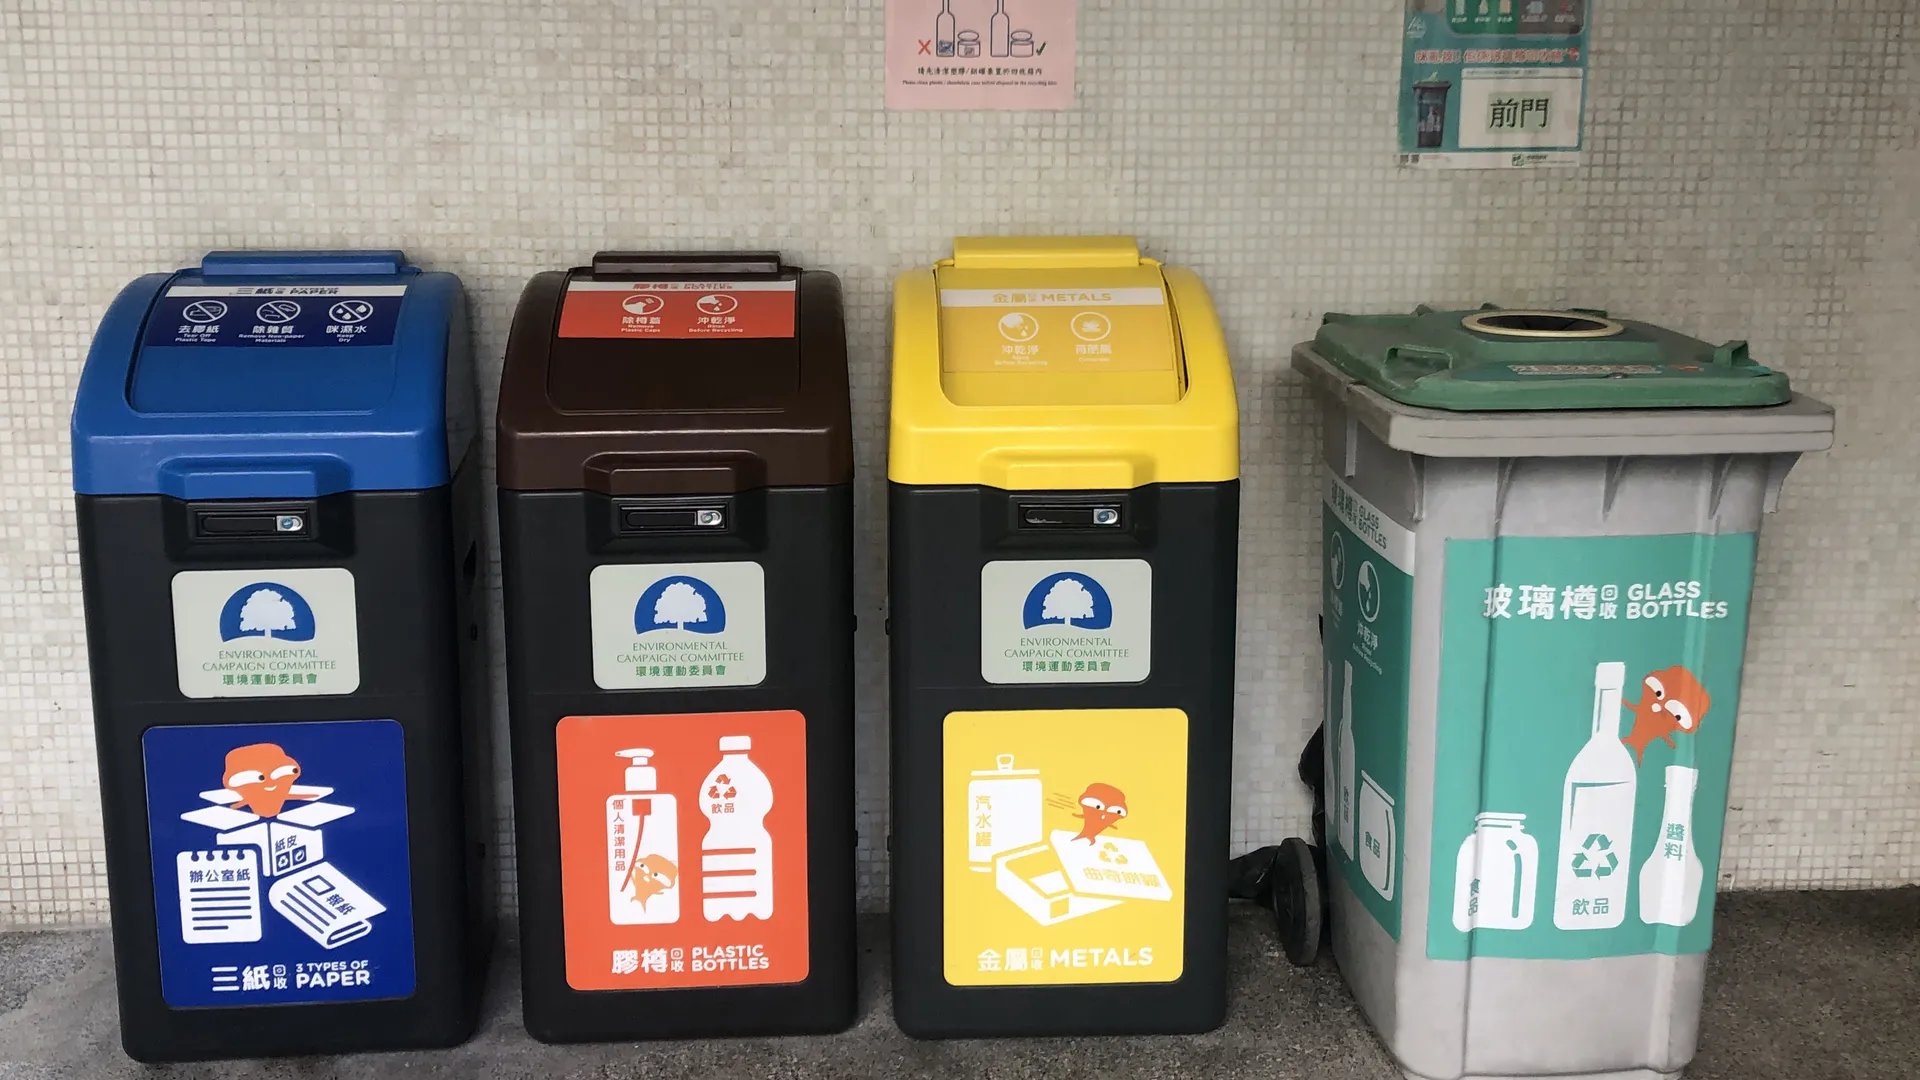 Waste Separation Bins for collecting different types of recyclables, including paper, metals, plastics and glass bottles